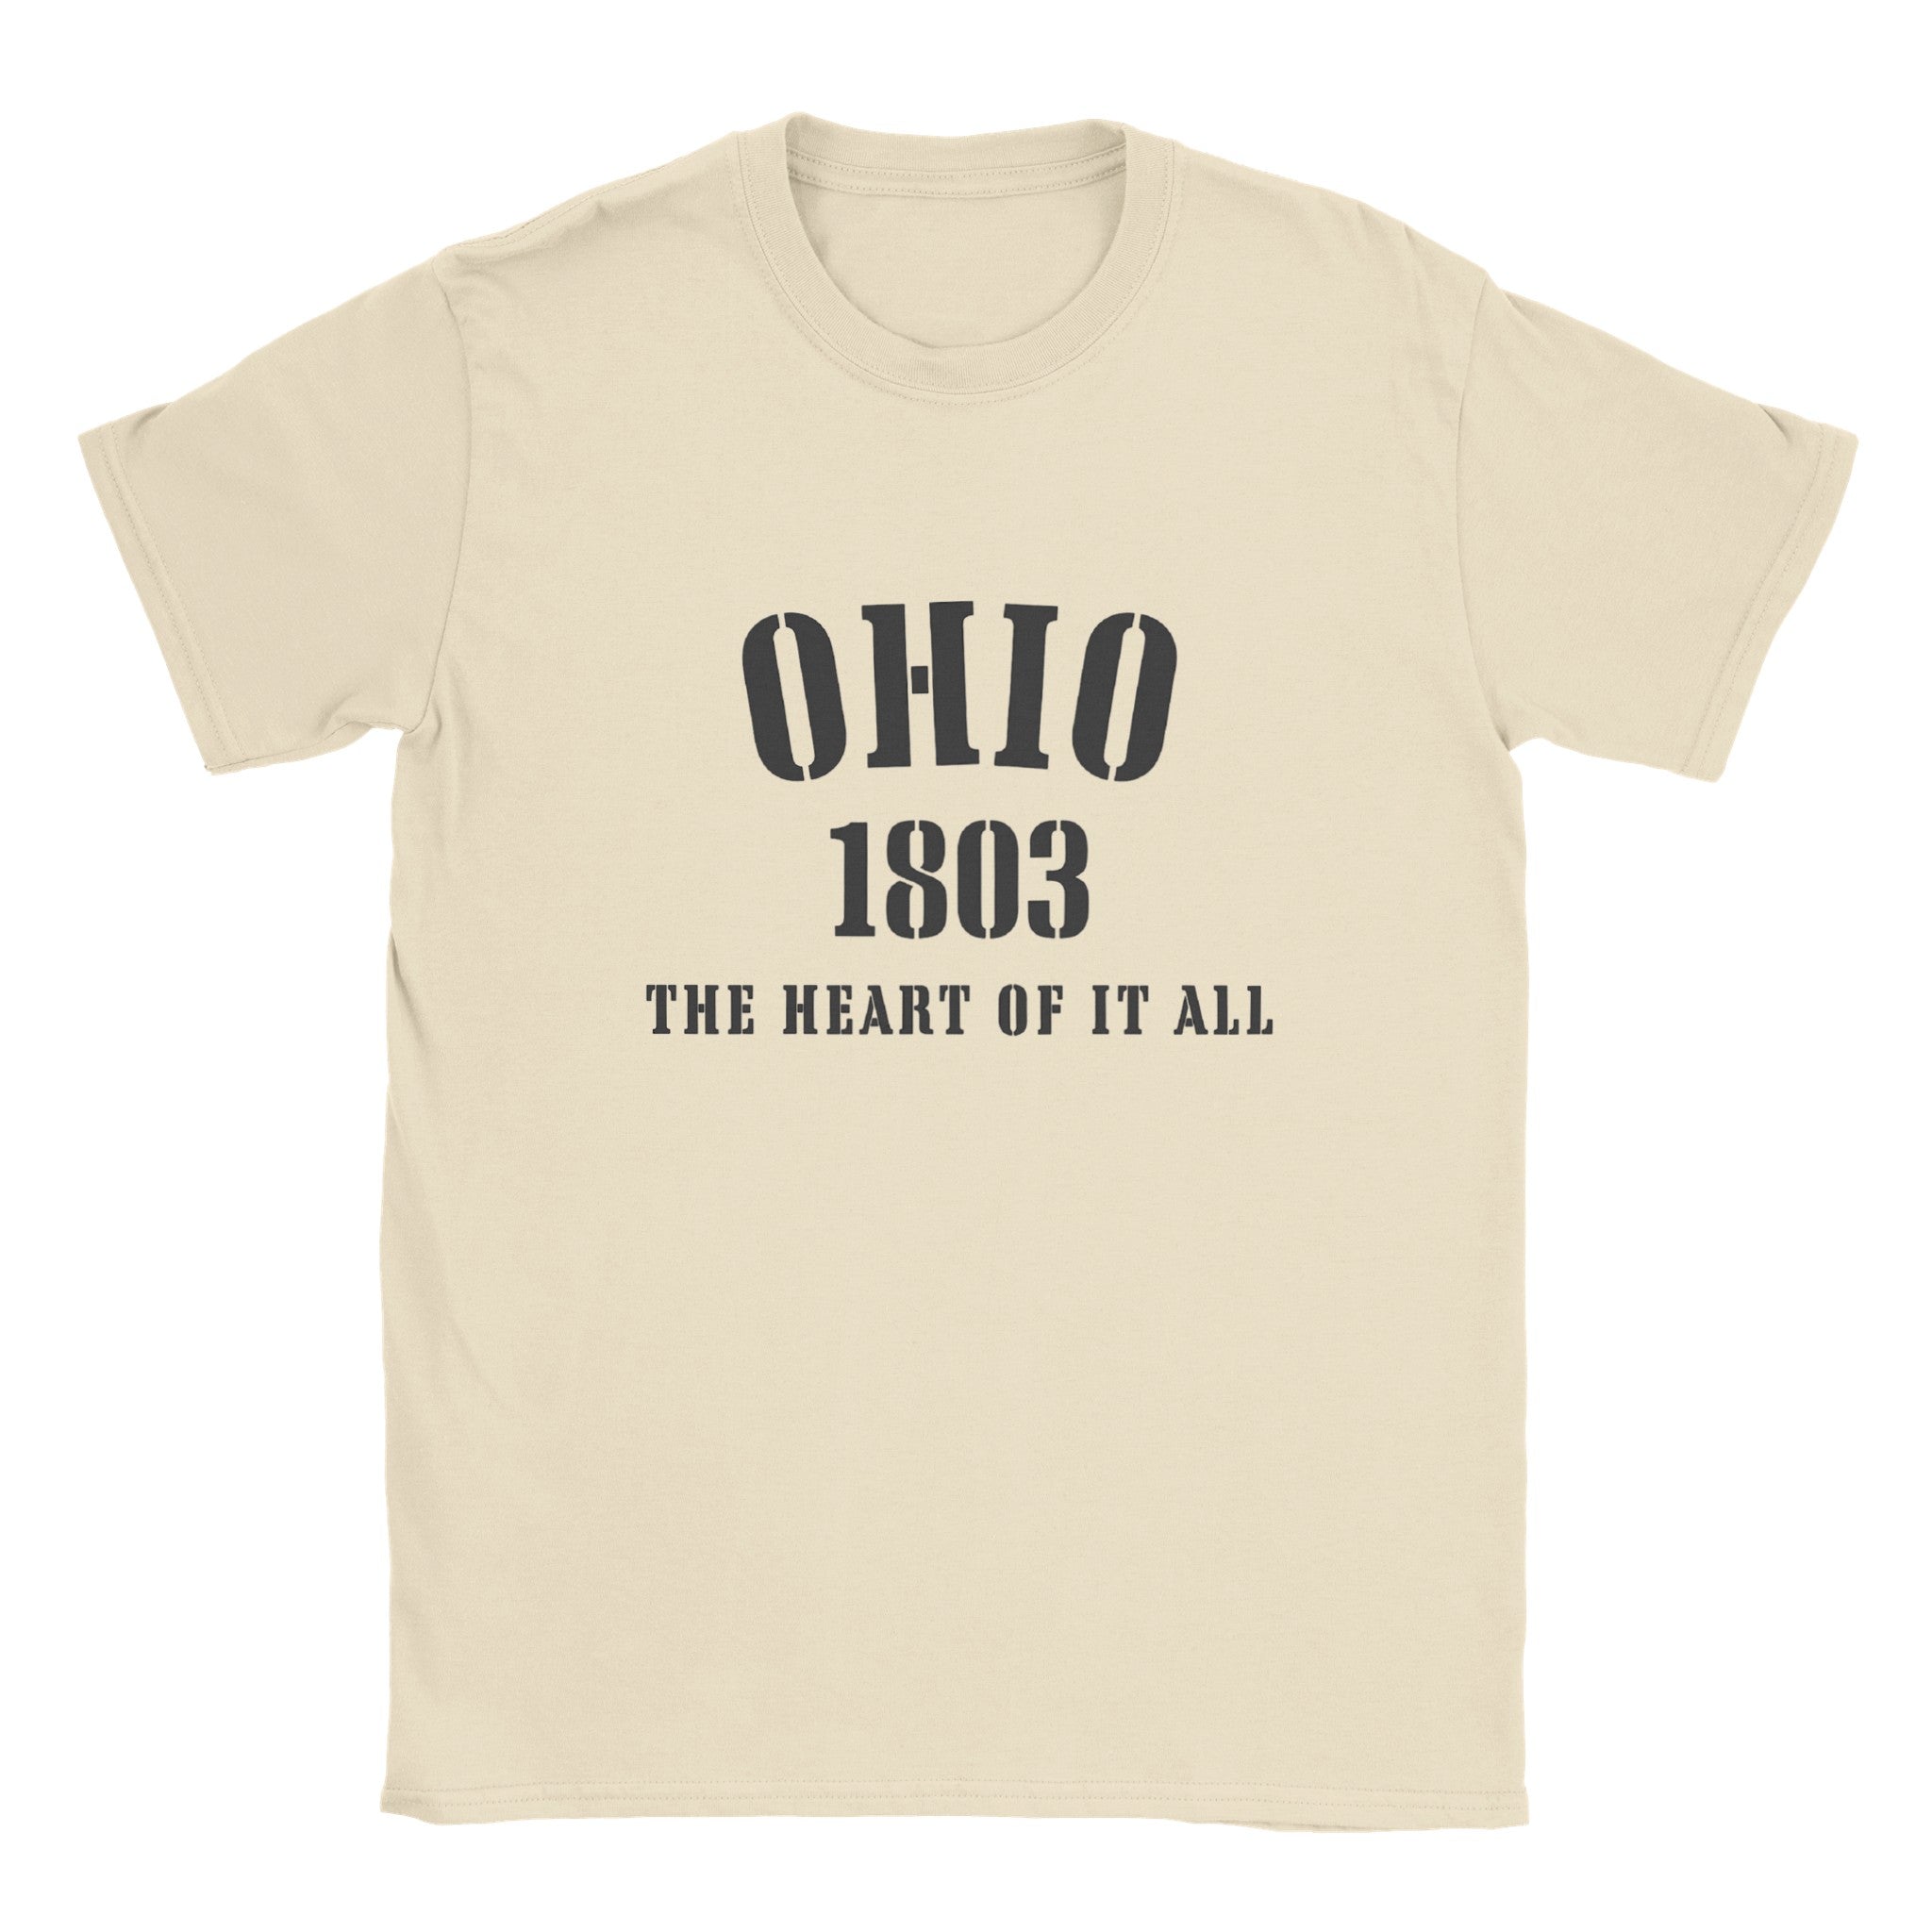 Ohio- Classic Unisex Crewneck States T-shirt - Creations by Chris and Carlos